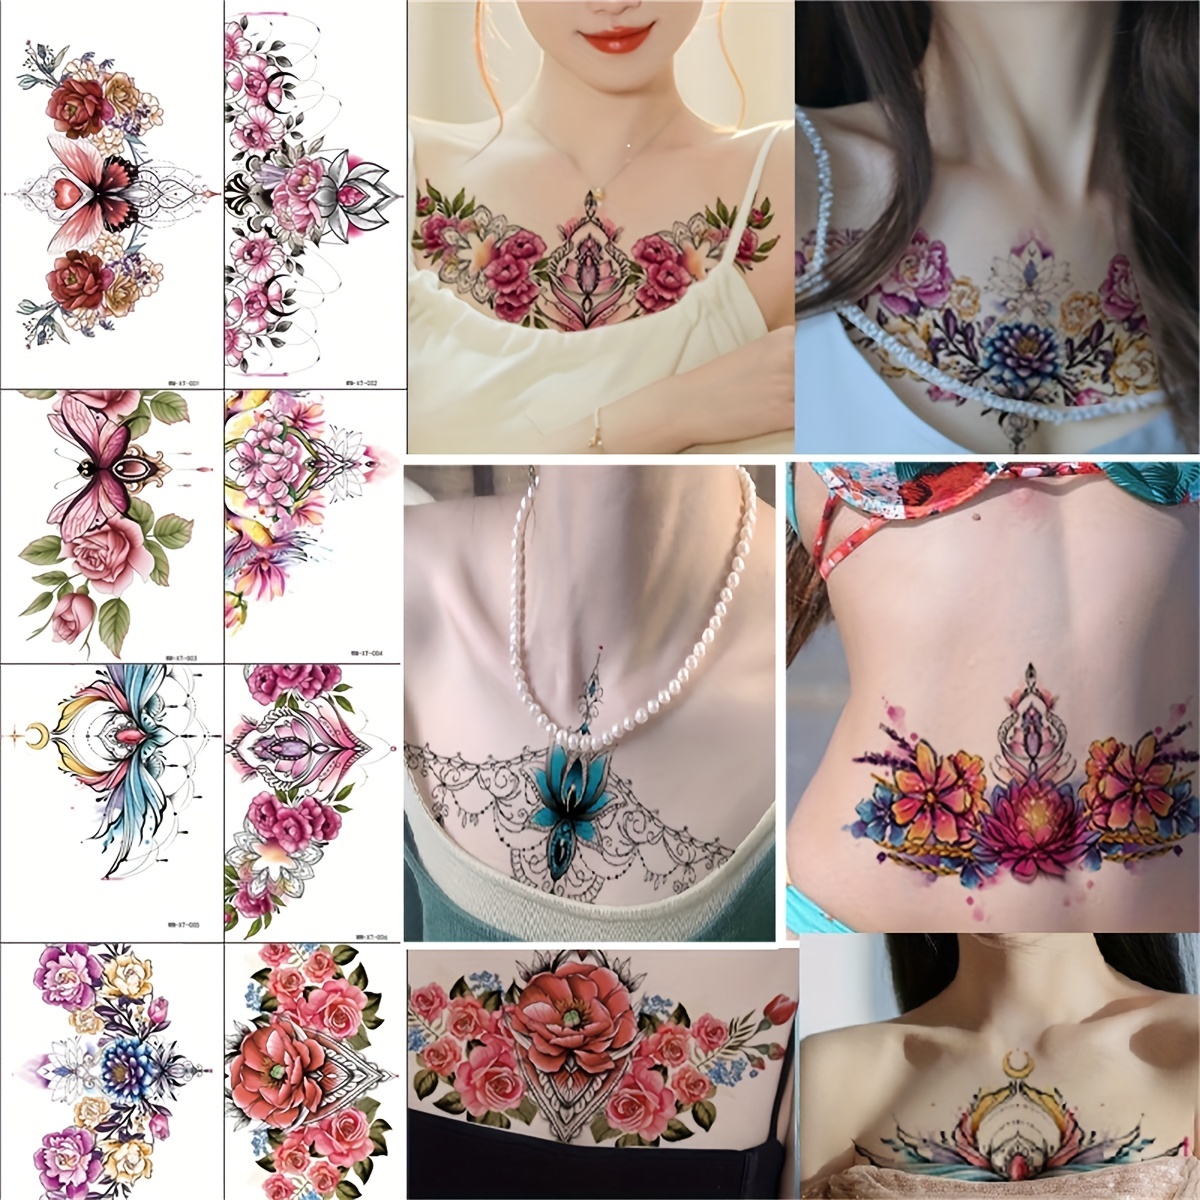 colorful chest tattoos designs